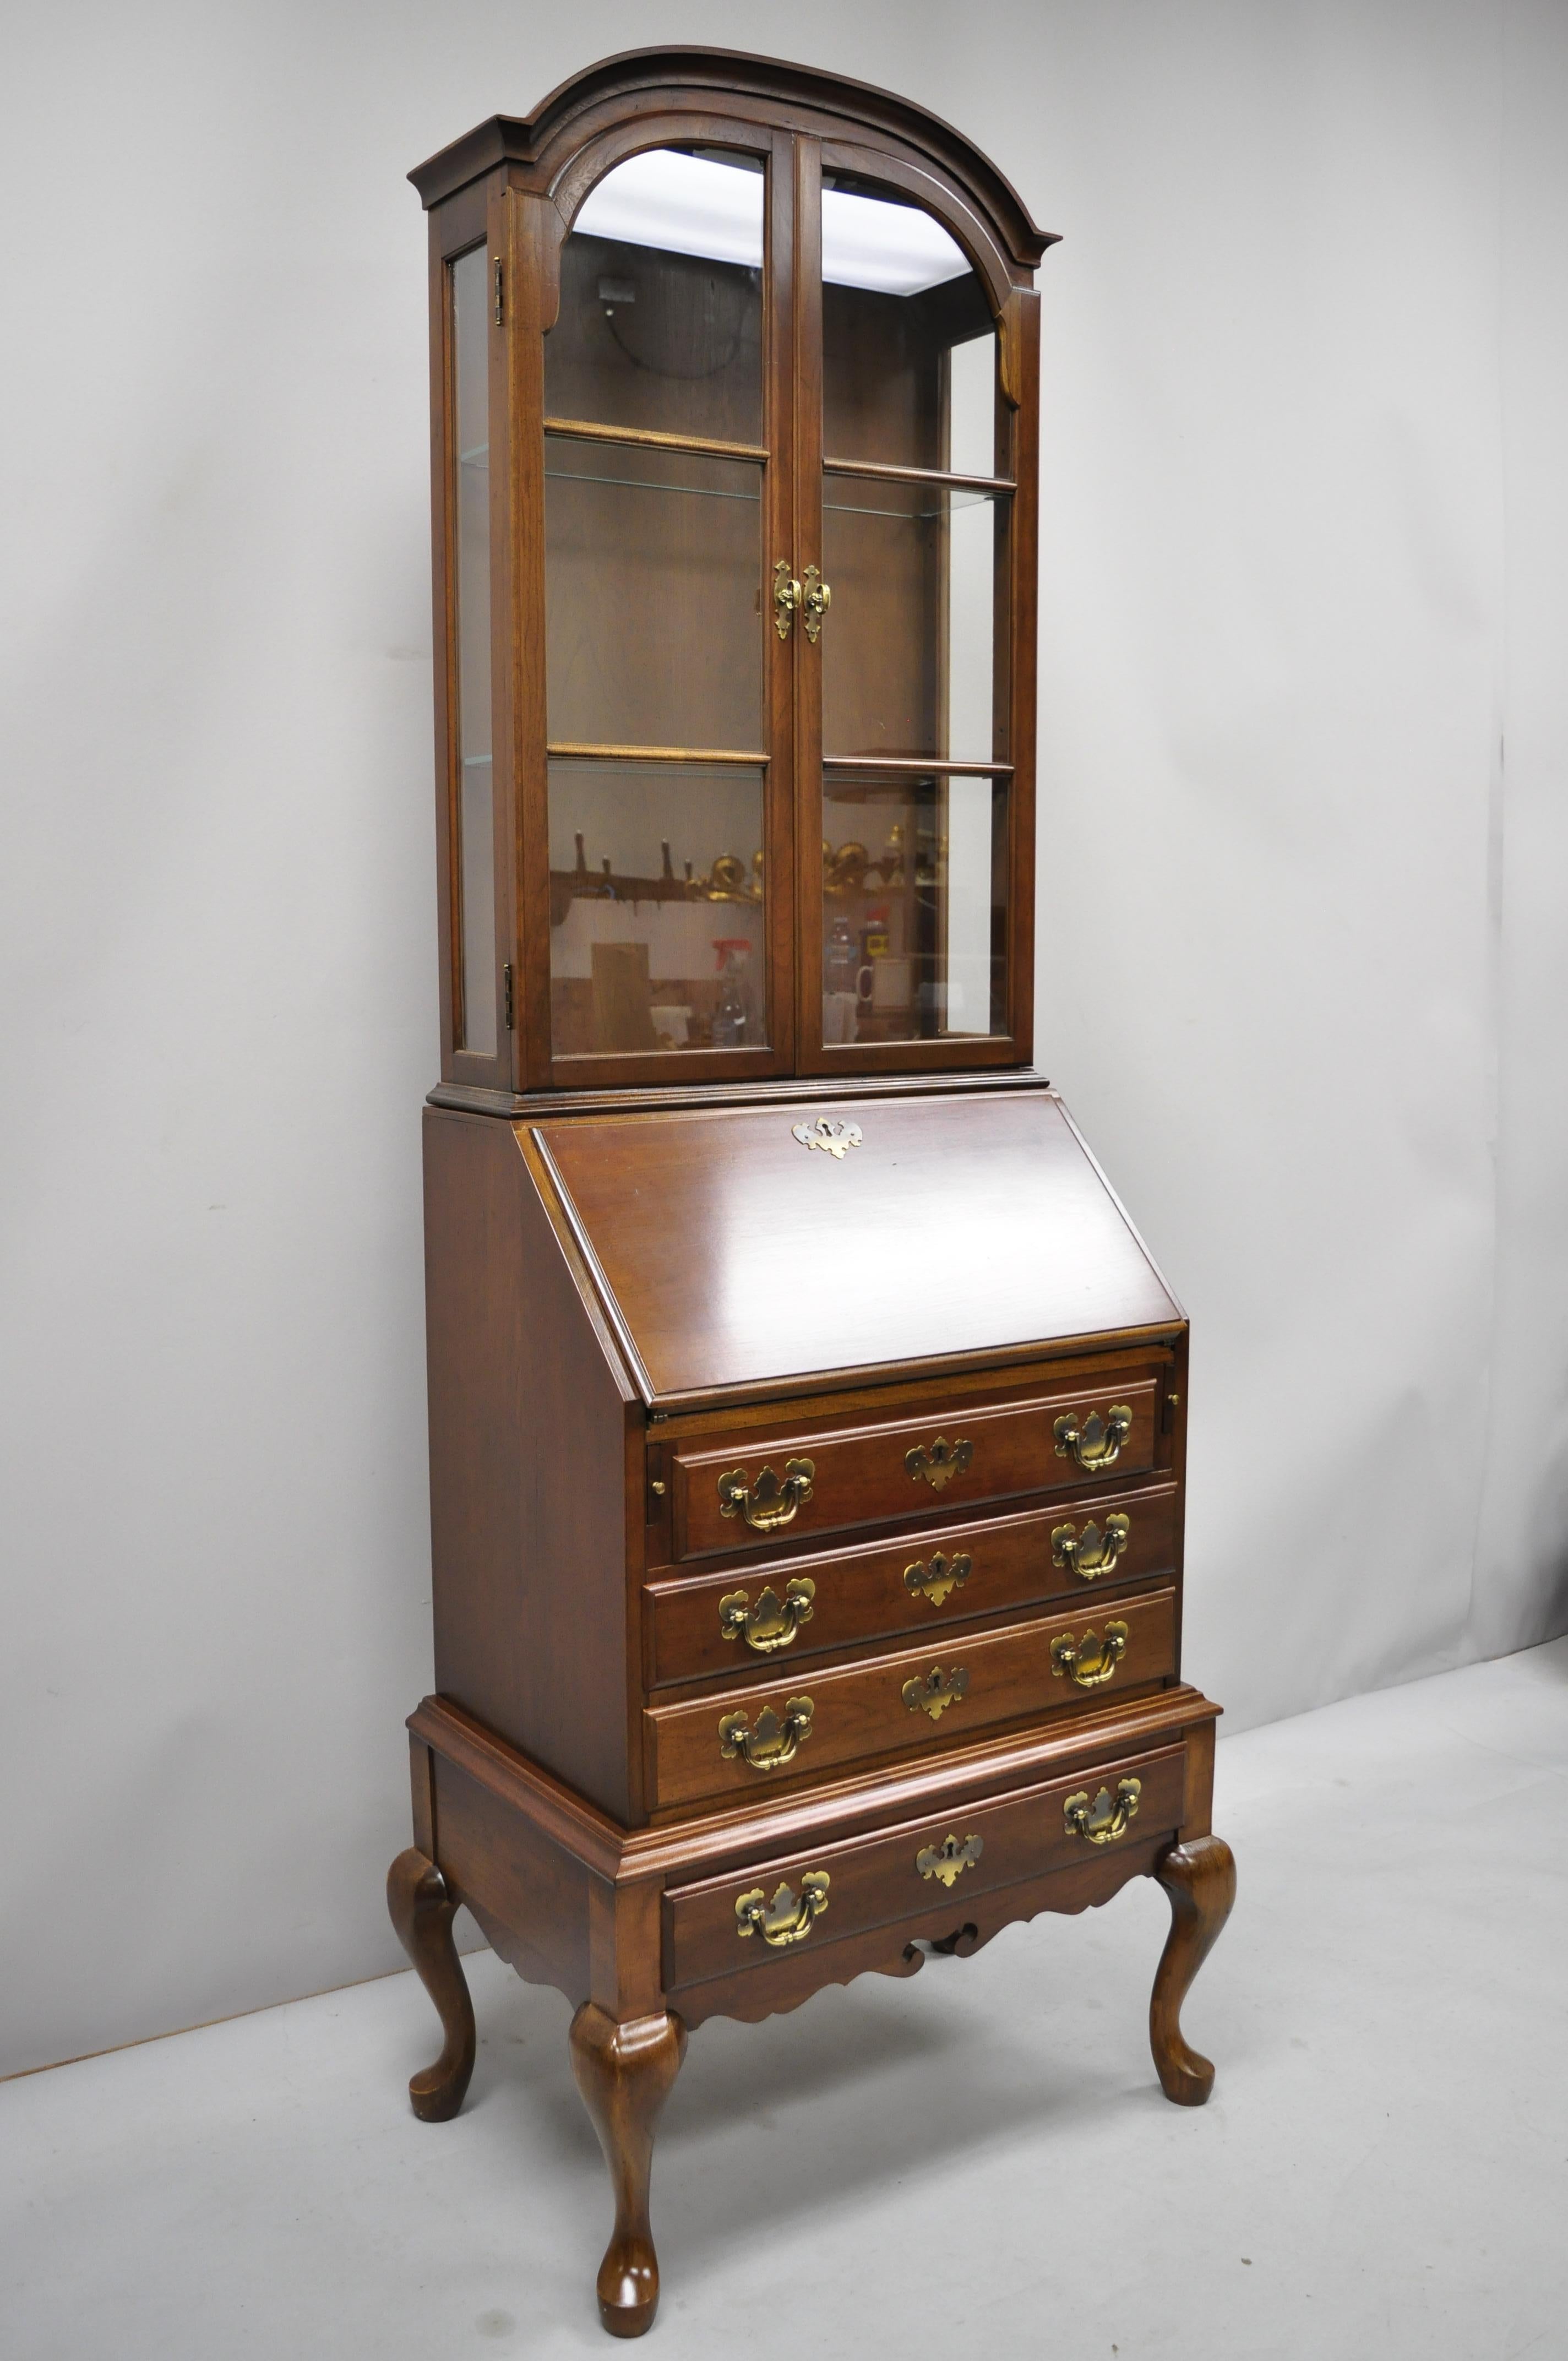 Vintage Maddox Queen Anne cherry small secretary desk display curio bookcase. Item features solid wood construction, nice smaller size, beautiful wood grain, 2 part construction, lighted interior, 2 glass swing doors, original labels, working lock